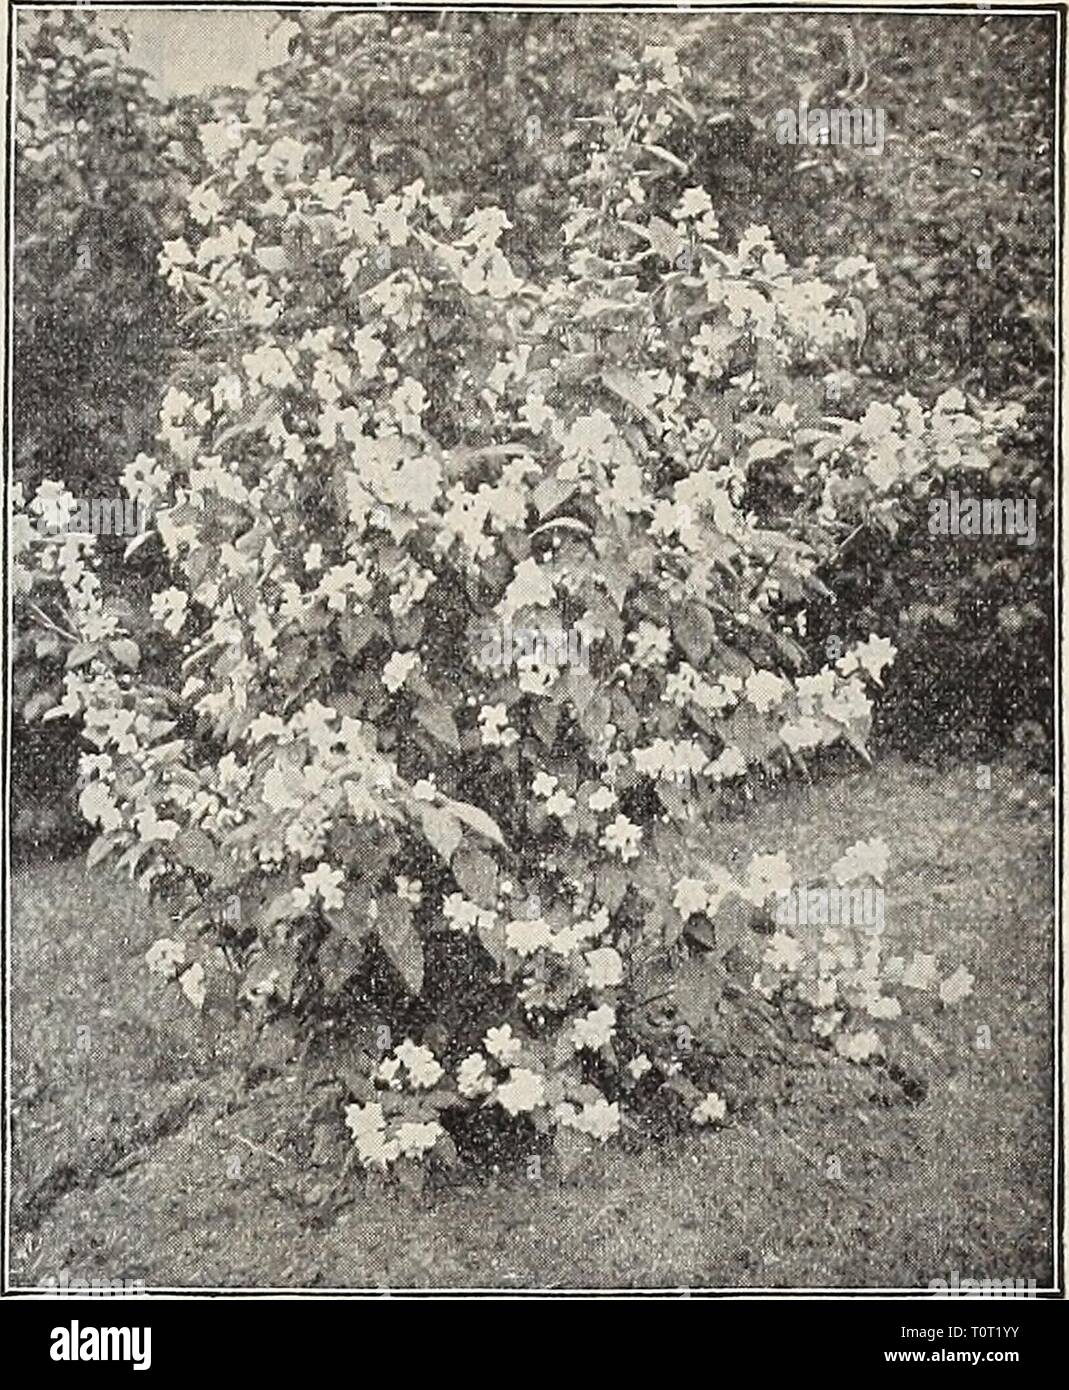 Dreer's 1907 garden book (1907) Dreer's 1907 garden book  dreers1907garden1907henr Year: 1907  fPffUBBfADRM PHILADELPHIA ¥ CHOICE HARDY SHRUBS 193 LlgUStrum Ibota. A Japanese Privet of the most beautiful character, with dark green fresh foliage, contrasting well with the prominent racemes of fragrant white flowers. 25 cts. each. — Ovalifolium Aureum Eiegantissimum {Golden'Varie- gated Privet). A beautiful golden variegated form of Privet, very effective for associating with other shrubs. 25 cts. each. Lonicera (Busk Honeysuckles). — Ledebouri. Very distinct, producing red flowers in May. 25 ct Stock Photo